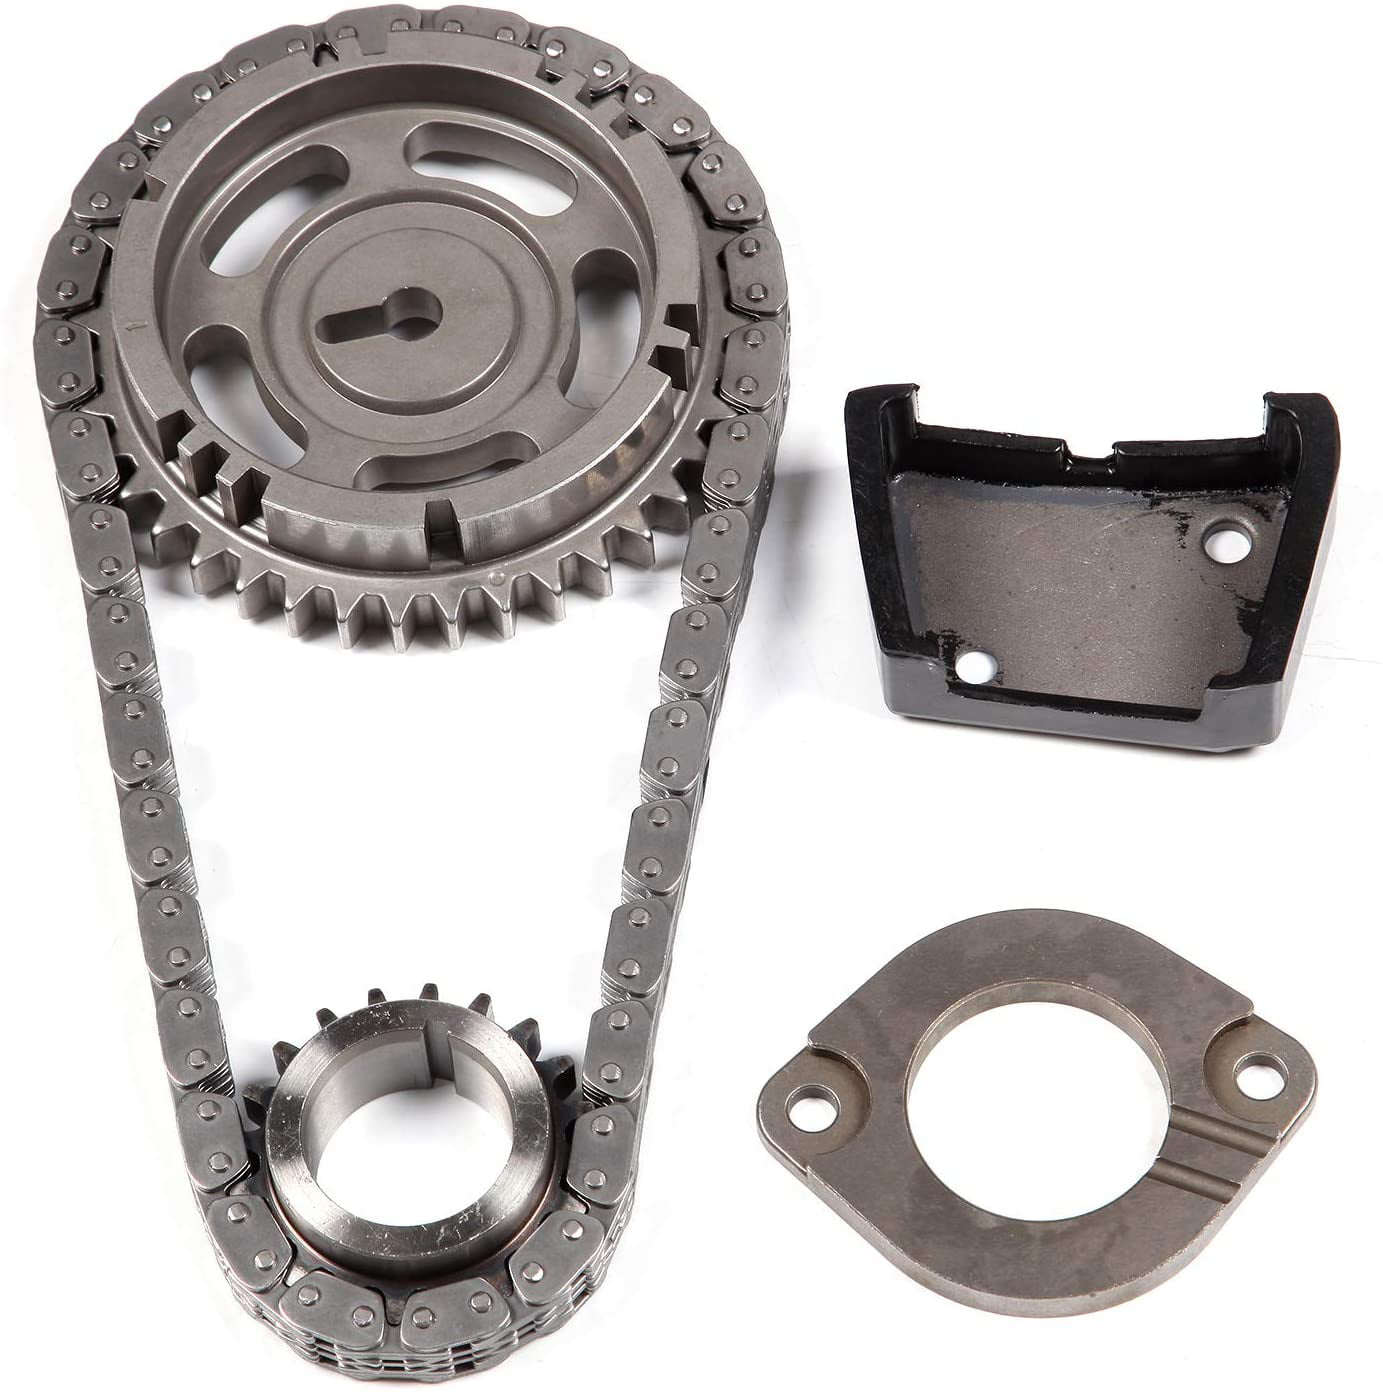 CCIYU Timing Chain Kit fit for Jeep for Chrysler for Dodge Wrangler Town &  Country Grand Caravan Pacifica Caravan   